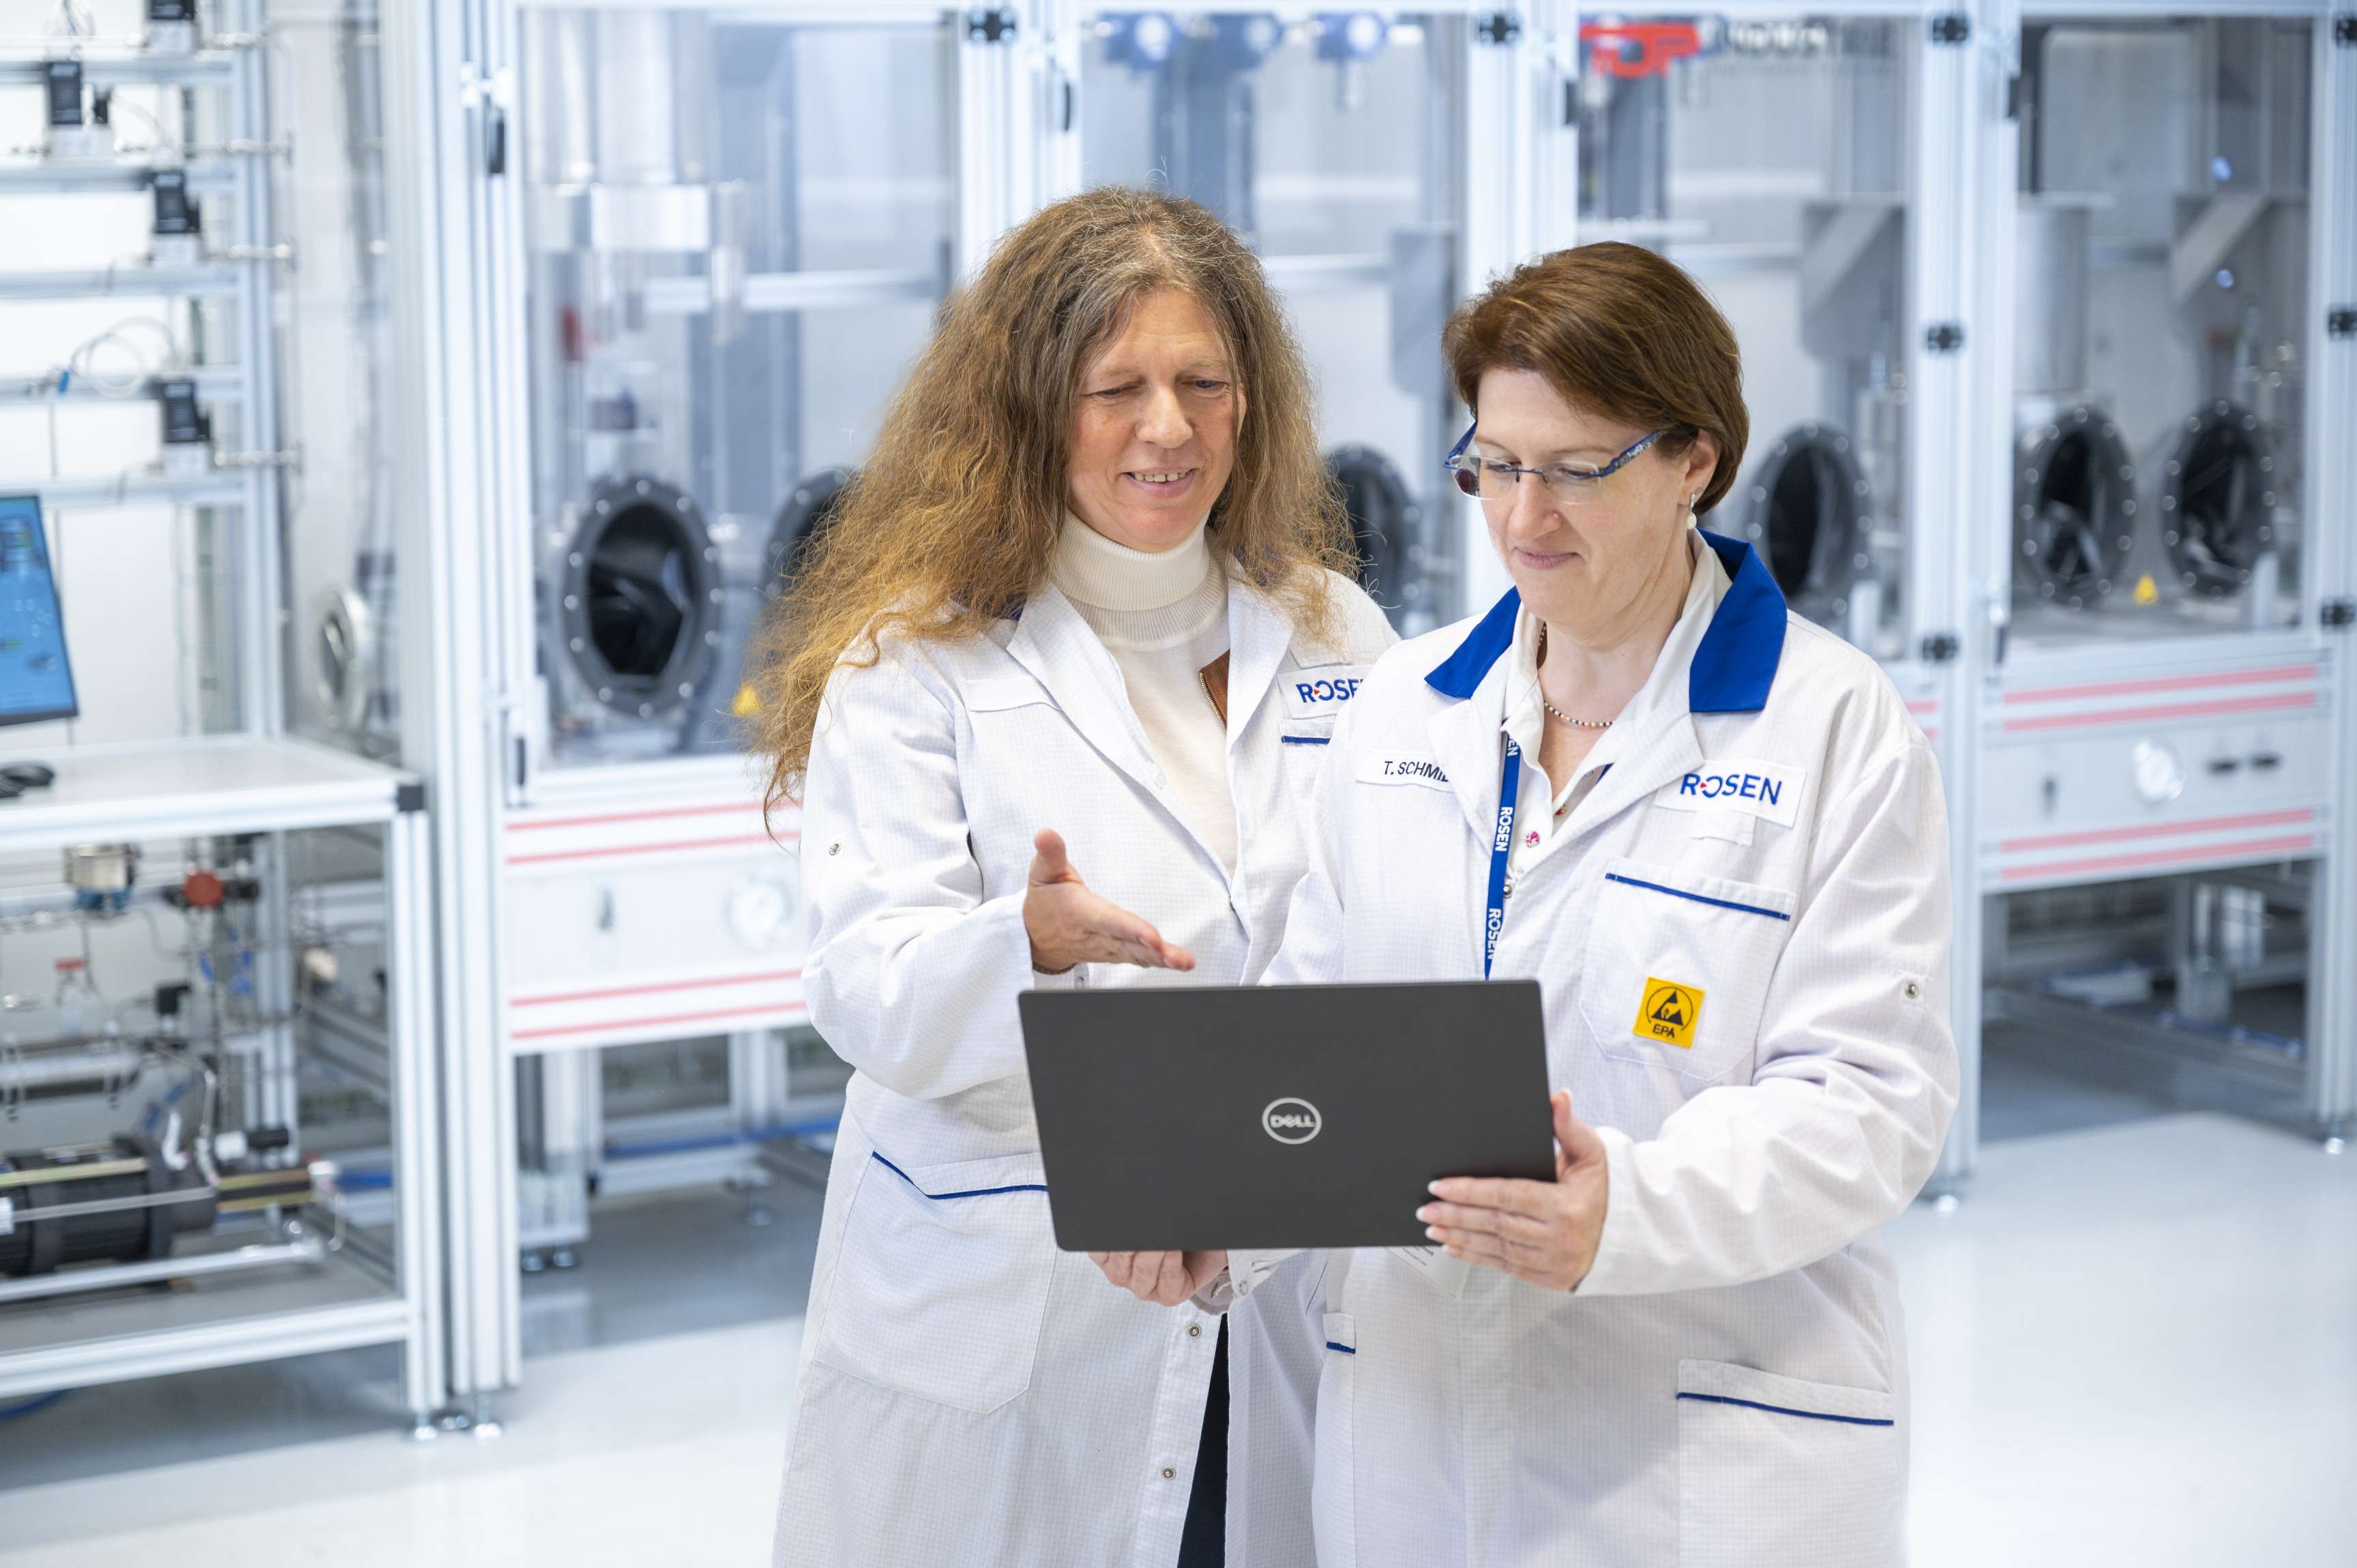 Two employees look at a laptop while standing in the hydrogen lab.